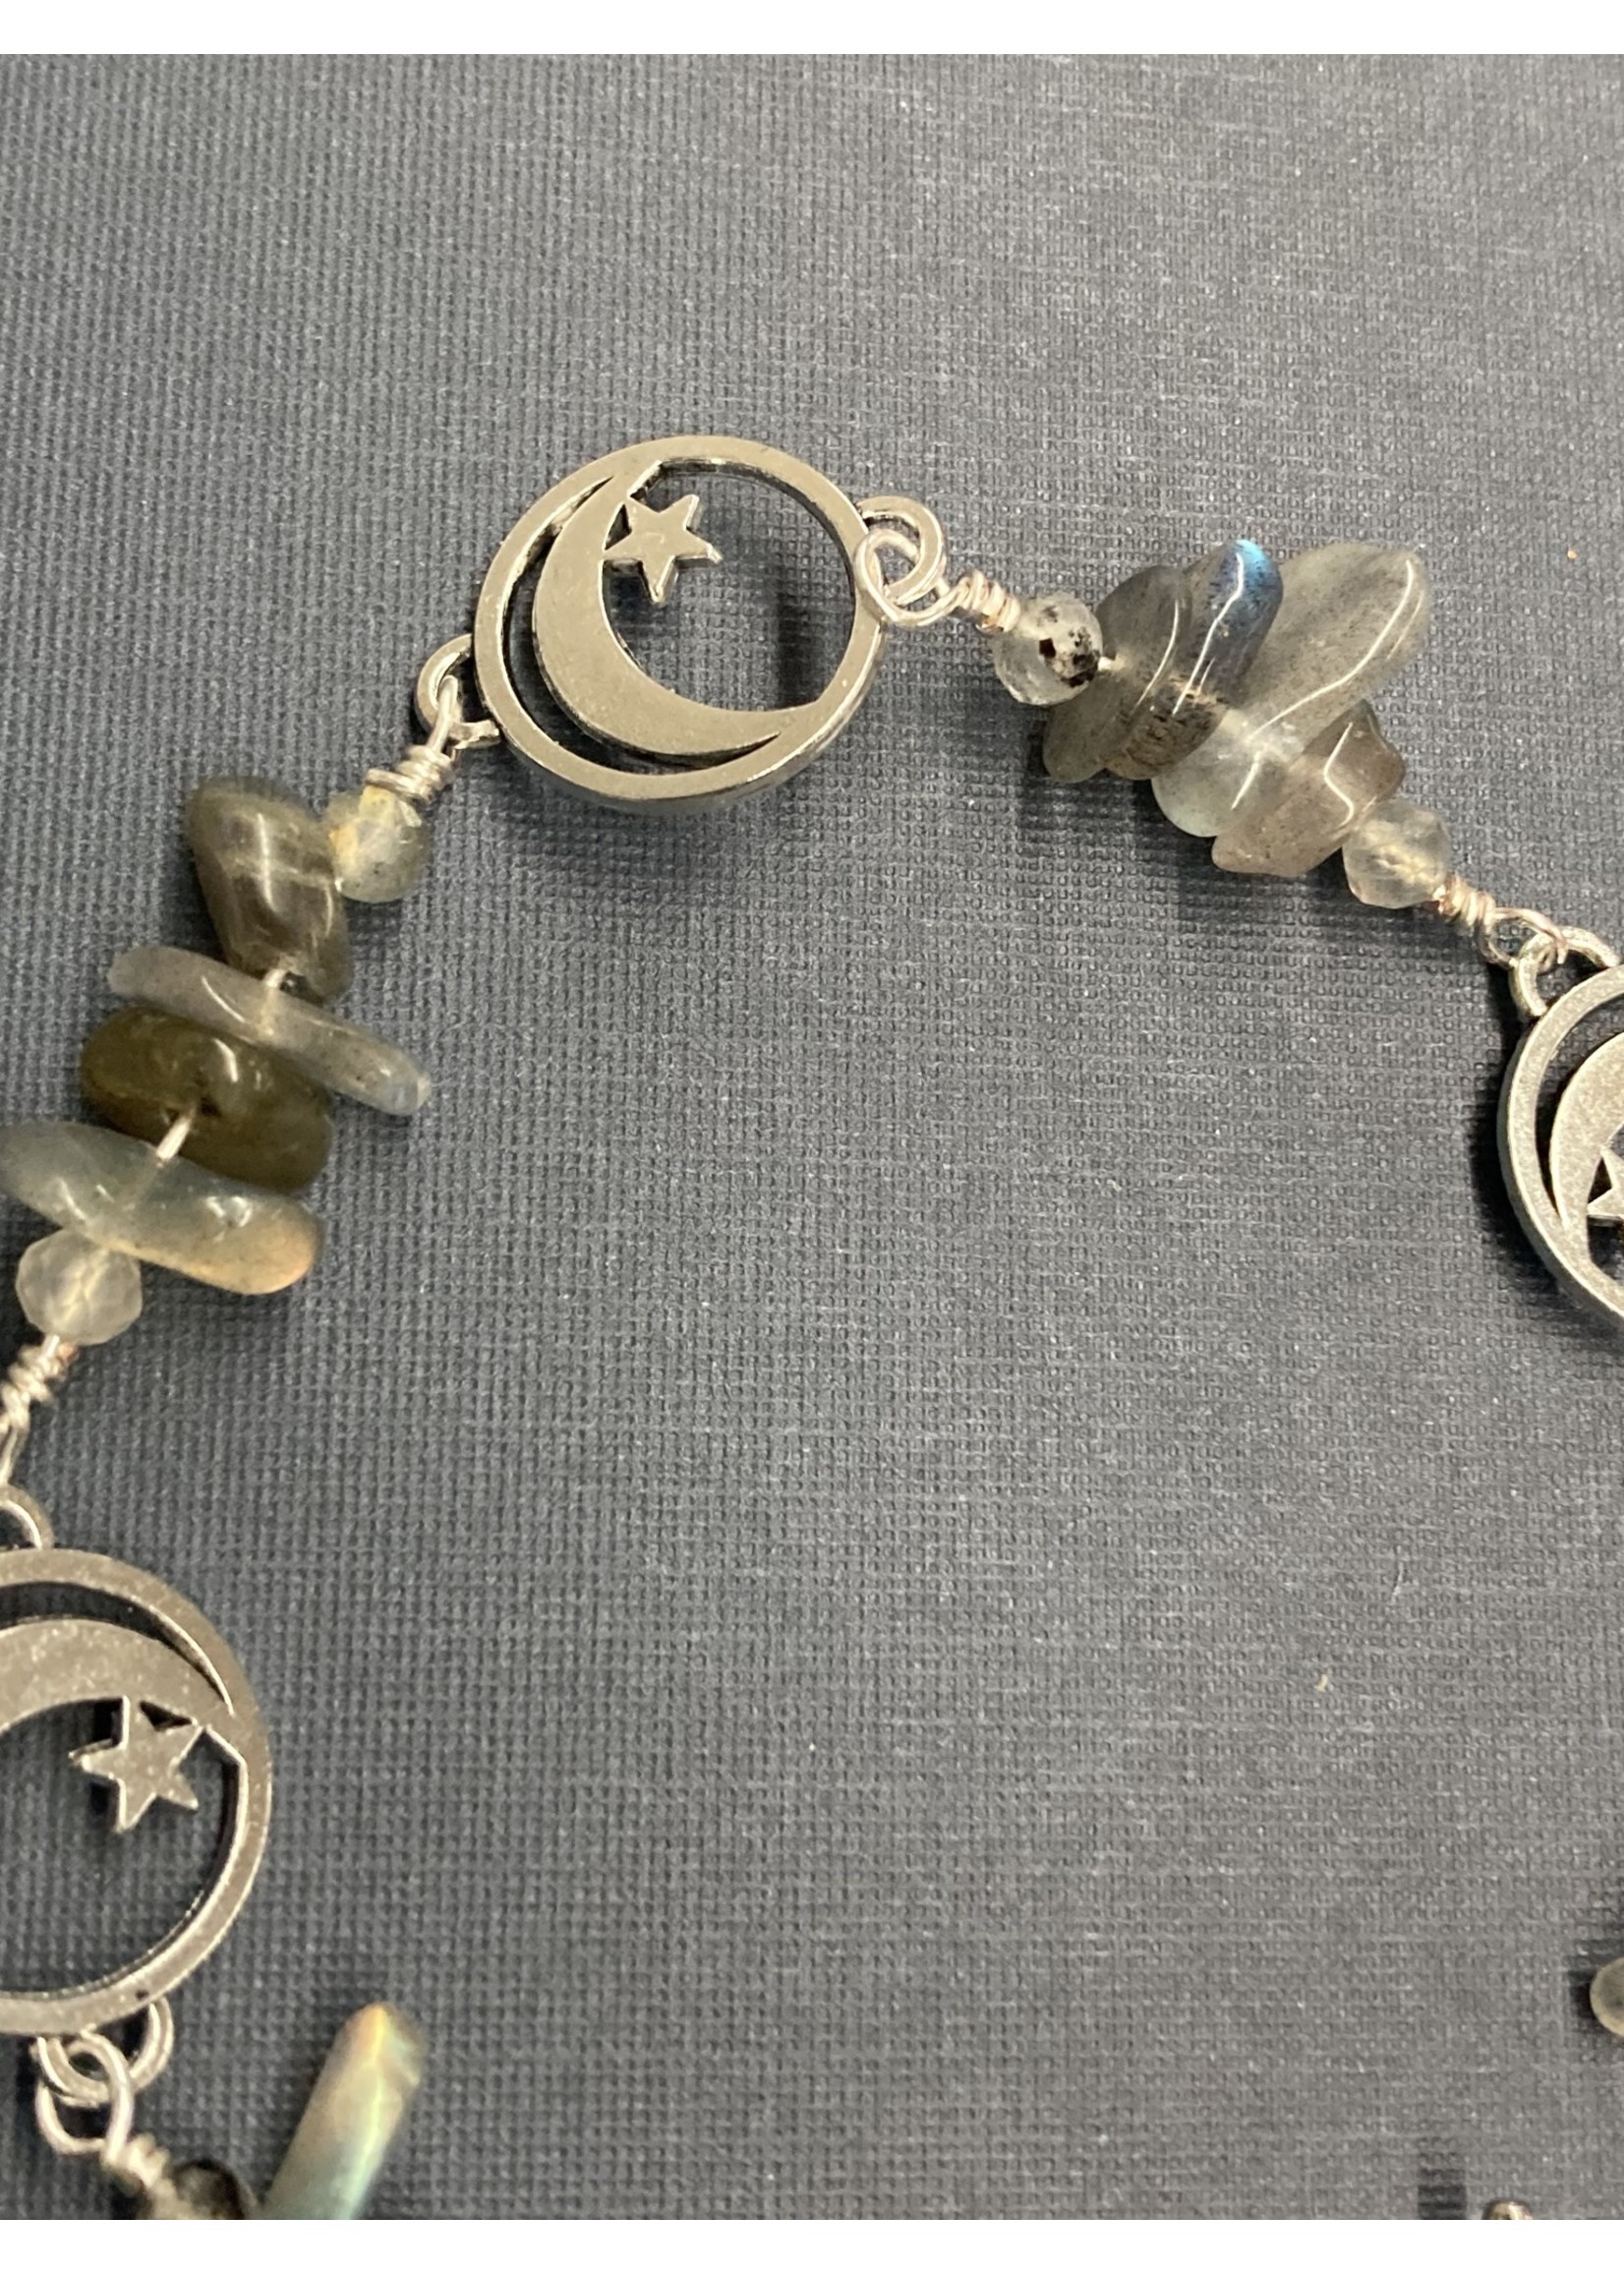 Our Twisted Dahlia B207 Labradorite Gem Chips and Beads with Crescent Moon Connector Bracelet